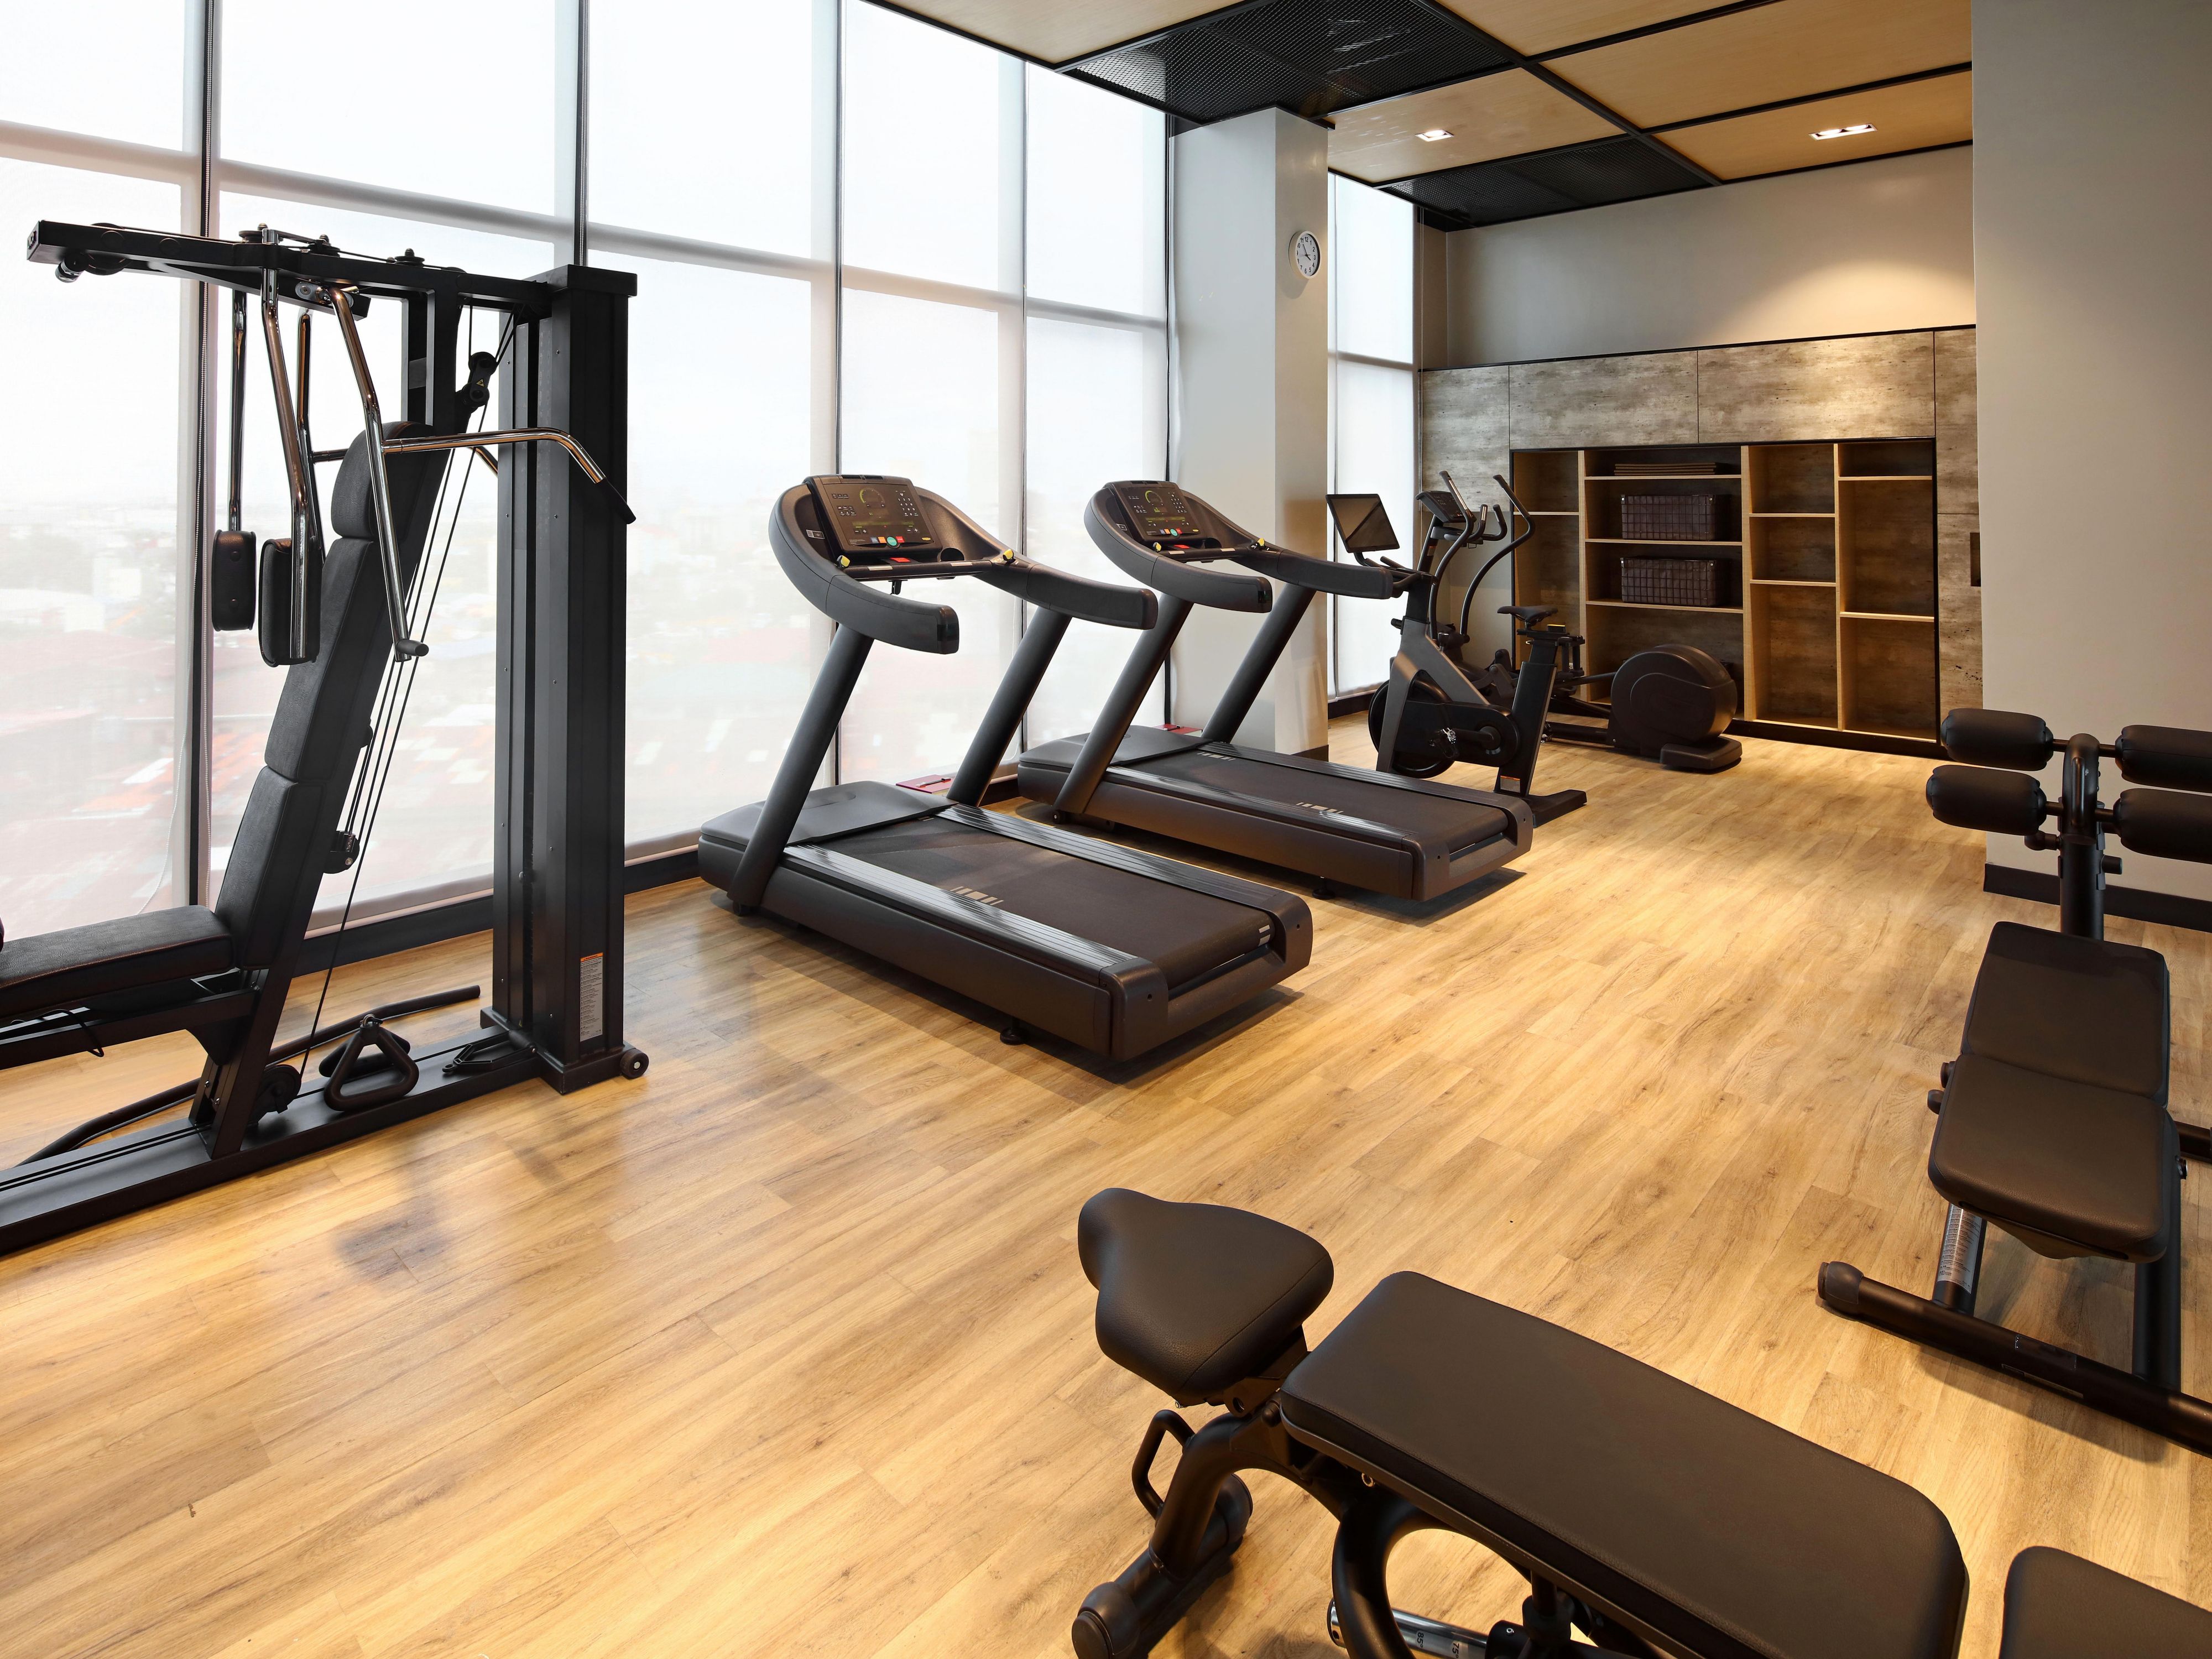 Power up with a quick workout at our Fitness Center located on the 7th floor beside the pool lounge. Open 24/7 for in-house guests. 